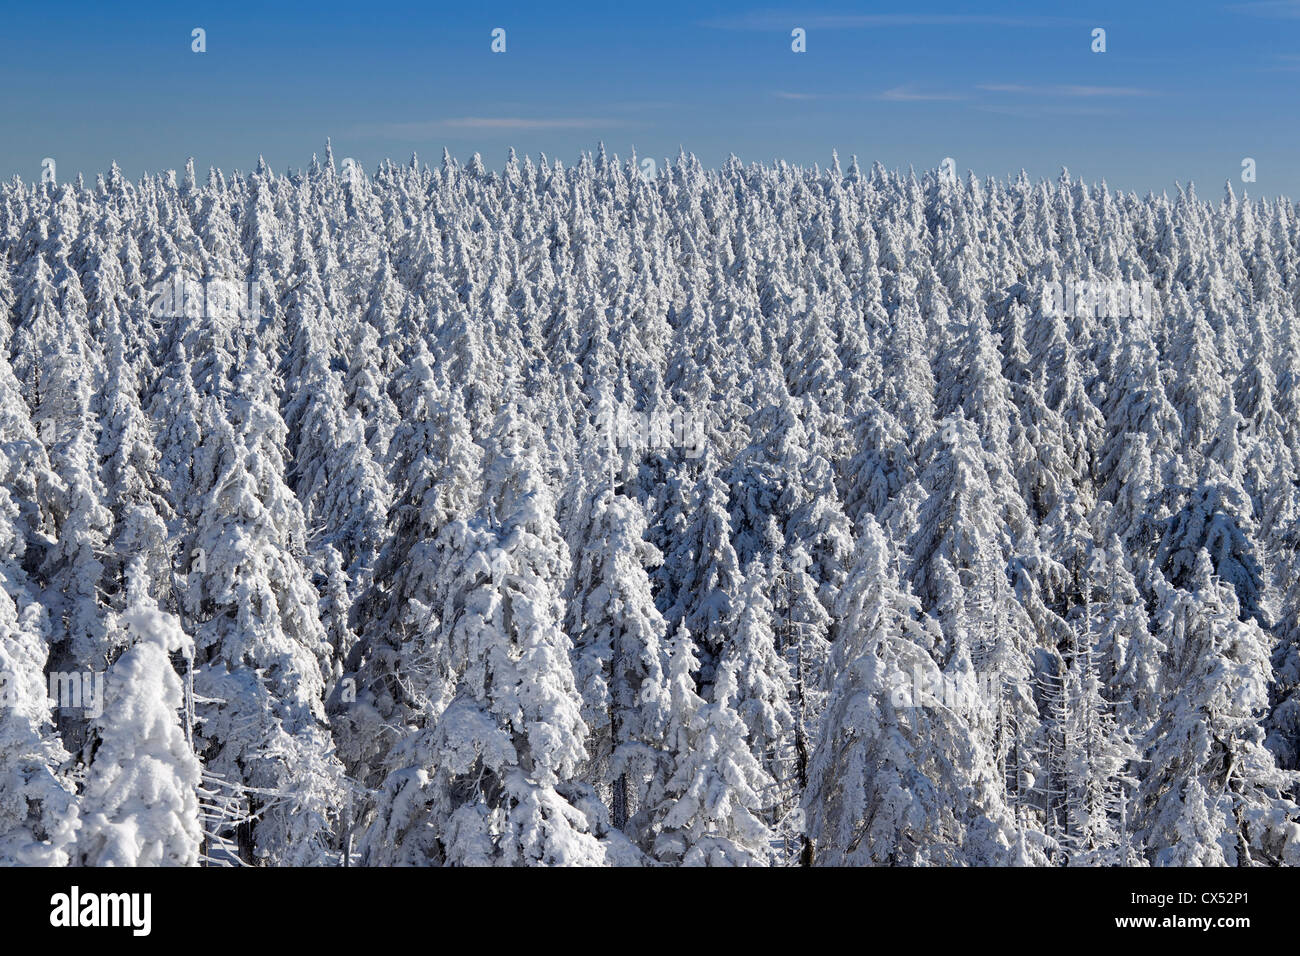 Frozen snow covered spruce trees in winter at Brocken, Blocksberg in the Harz National Park, Germany Stock Photo